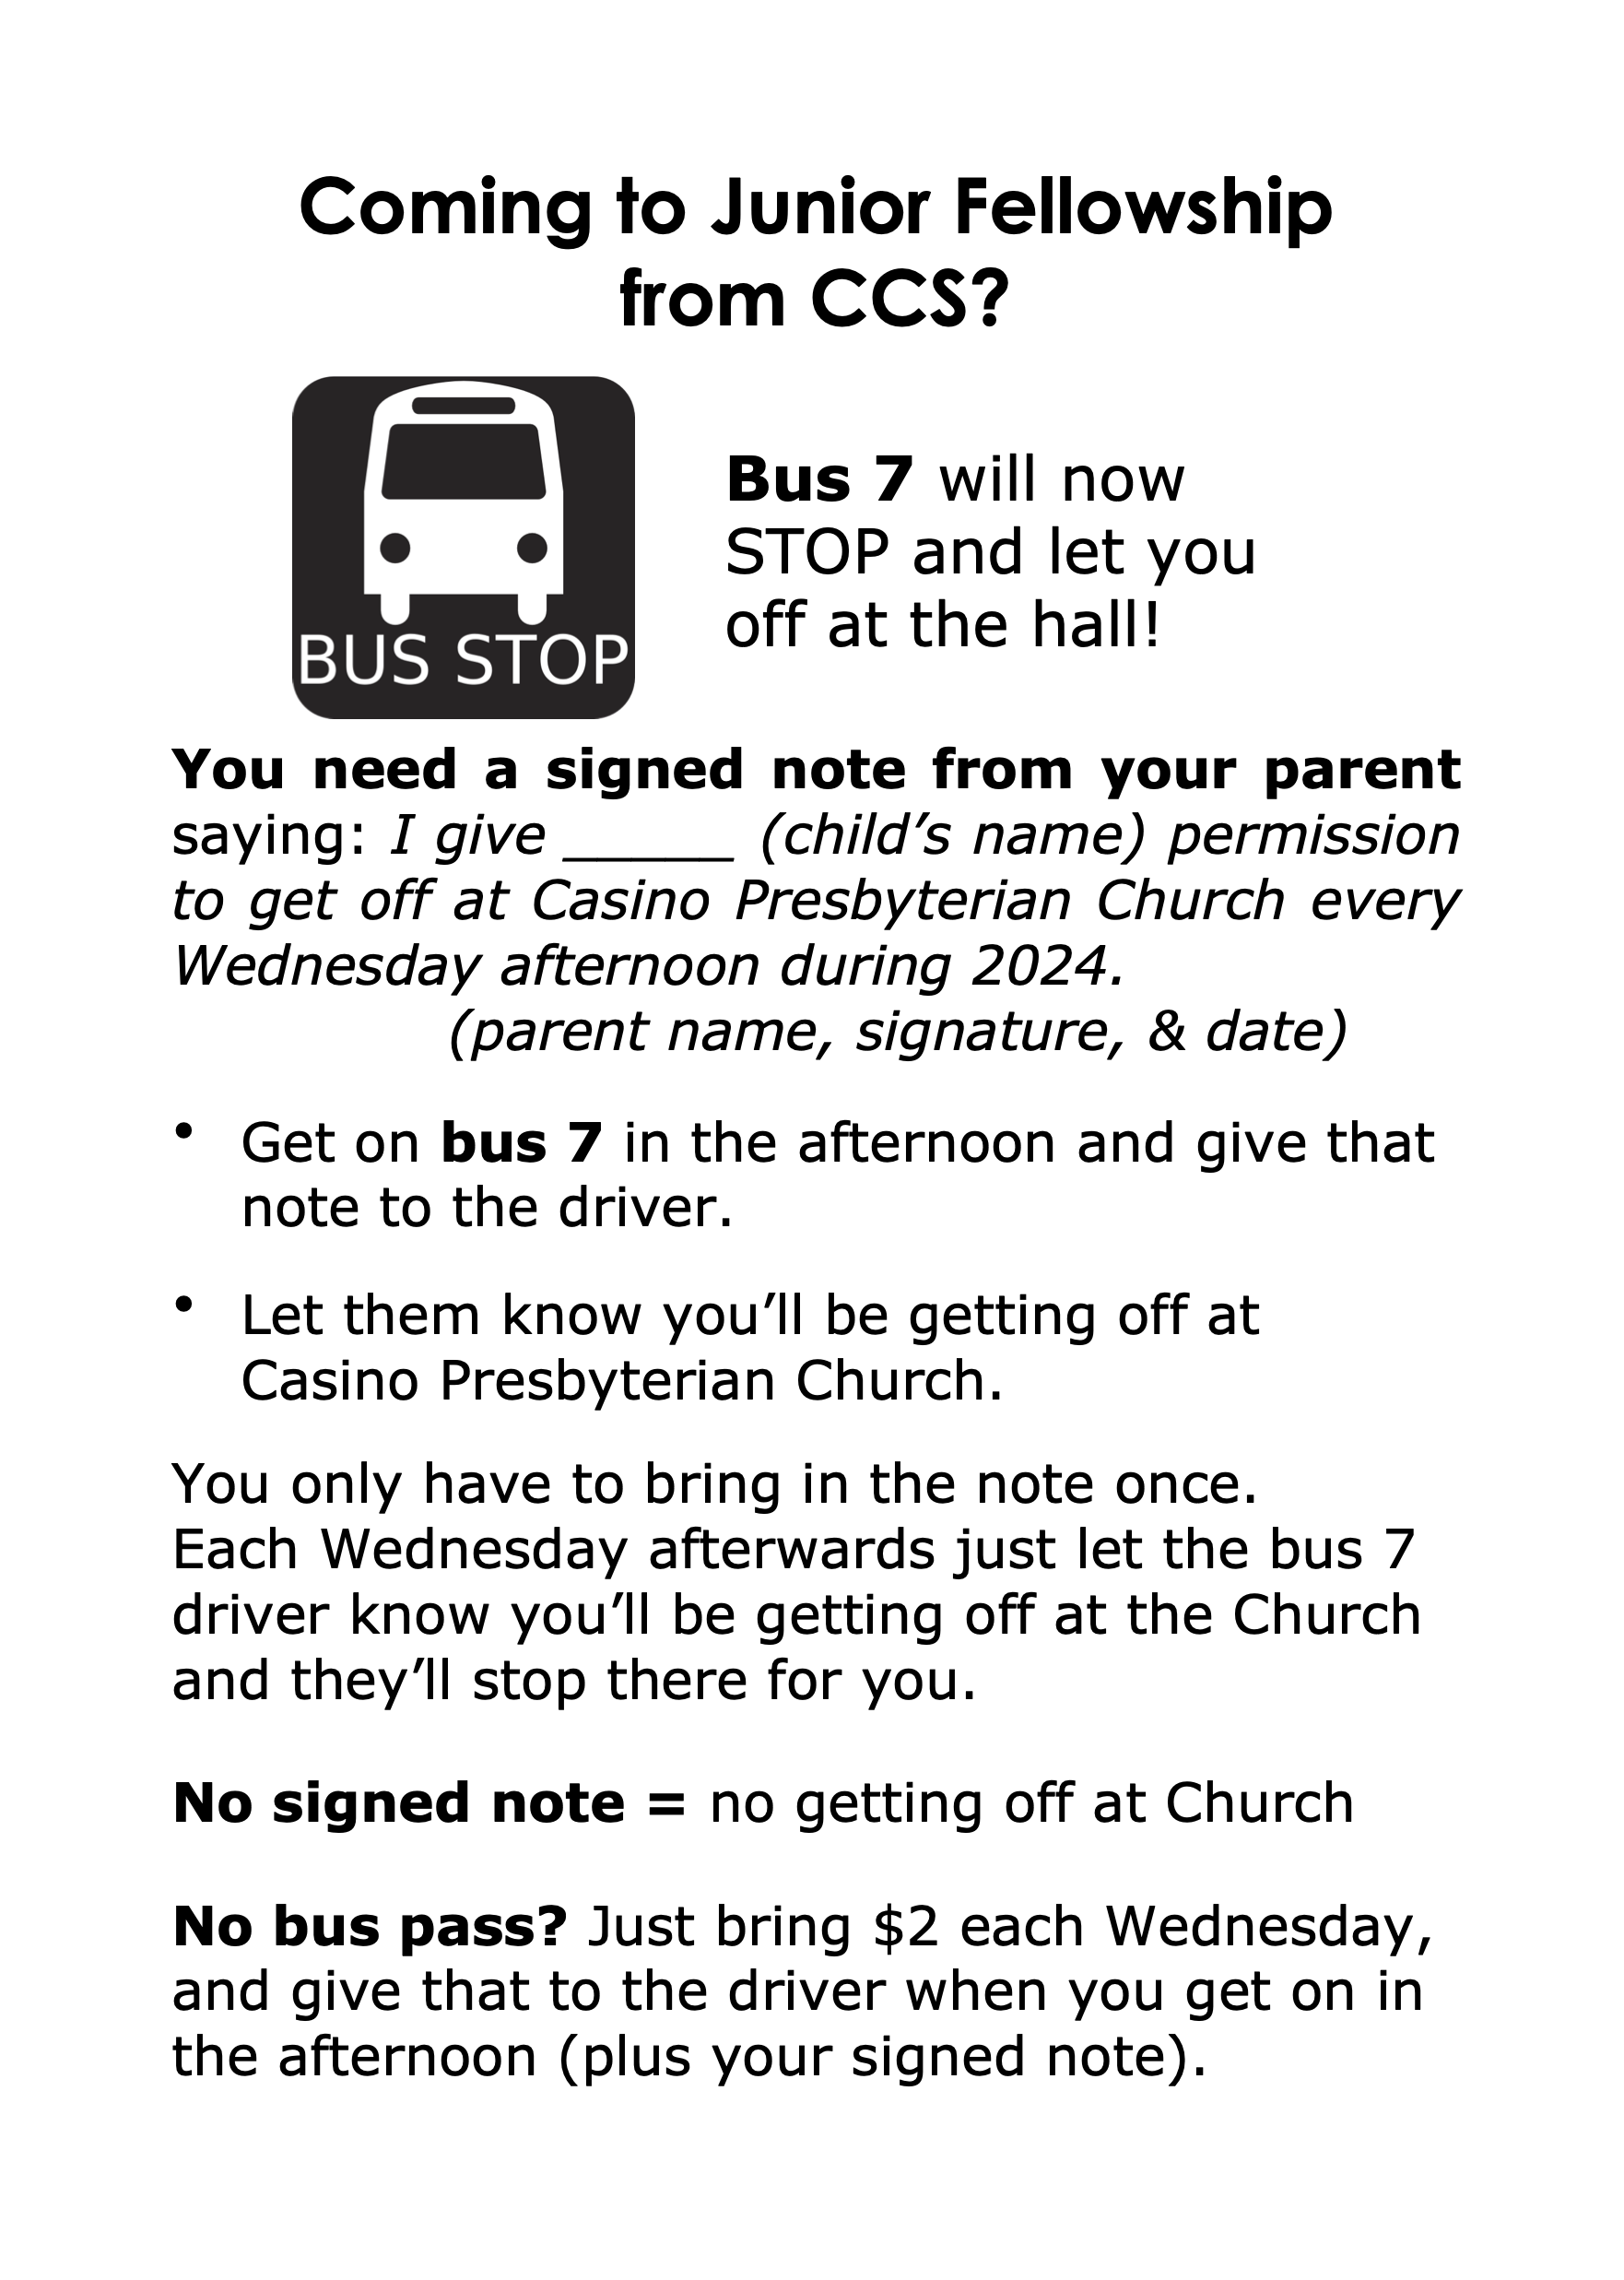 Bus note flyer 2024